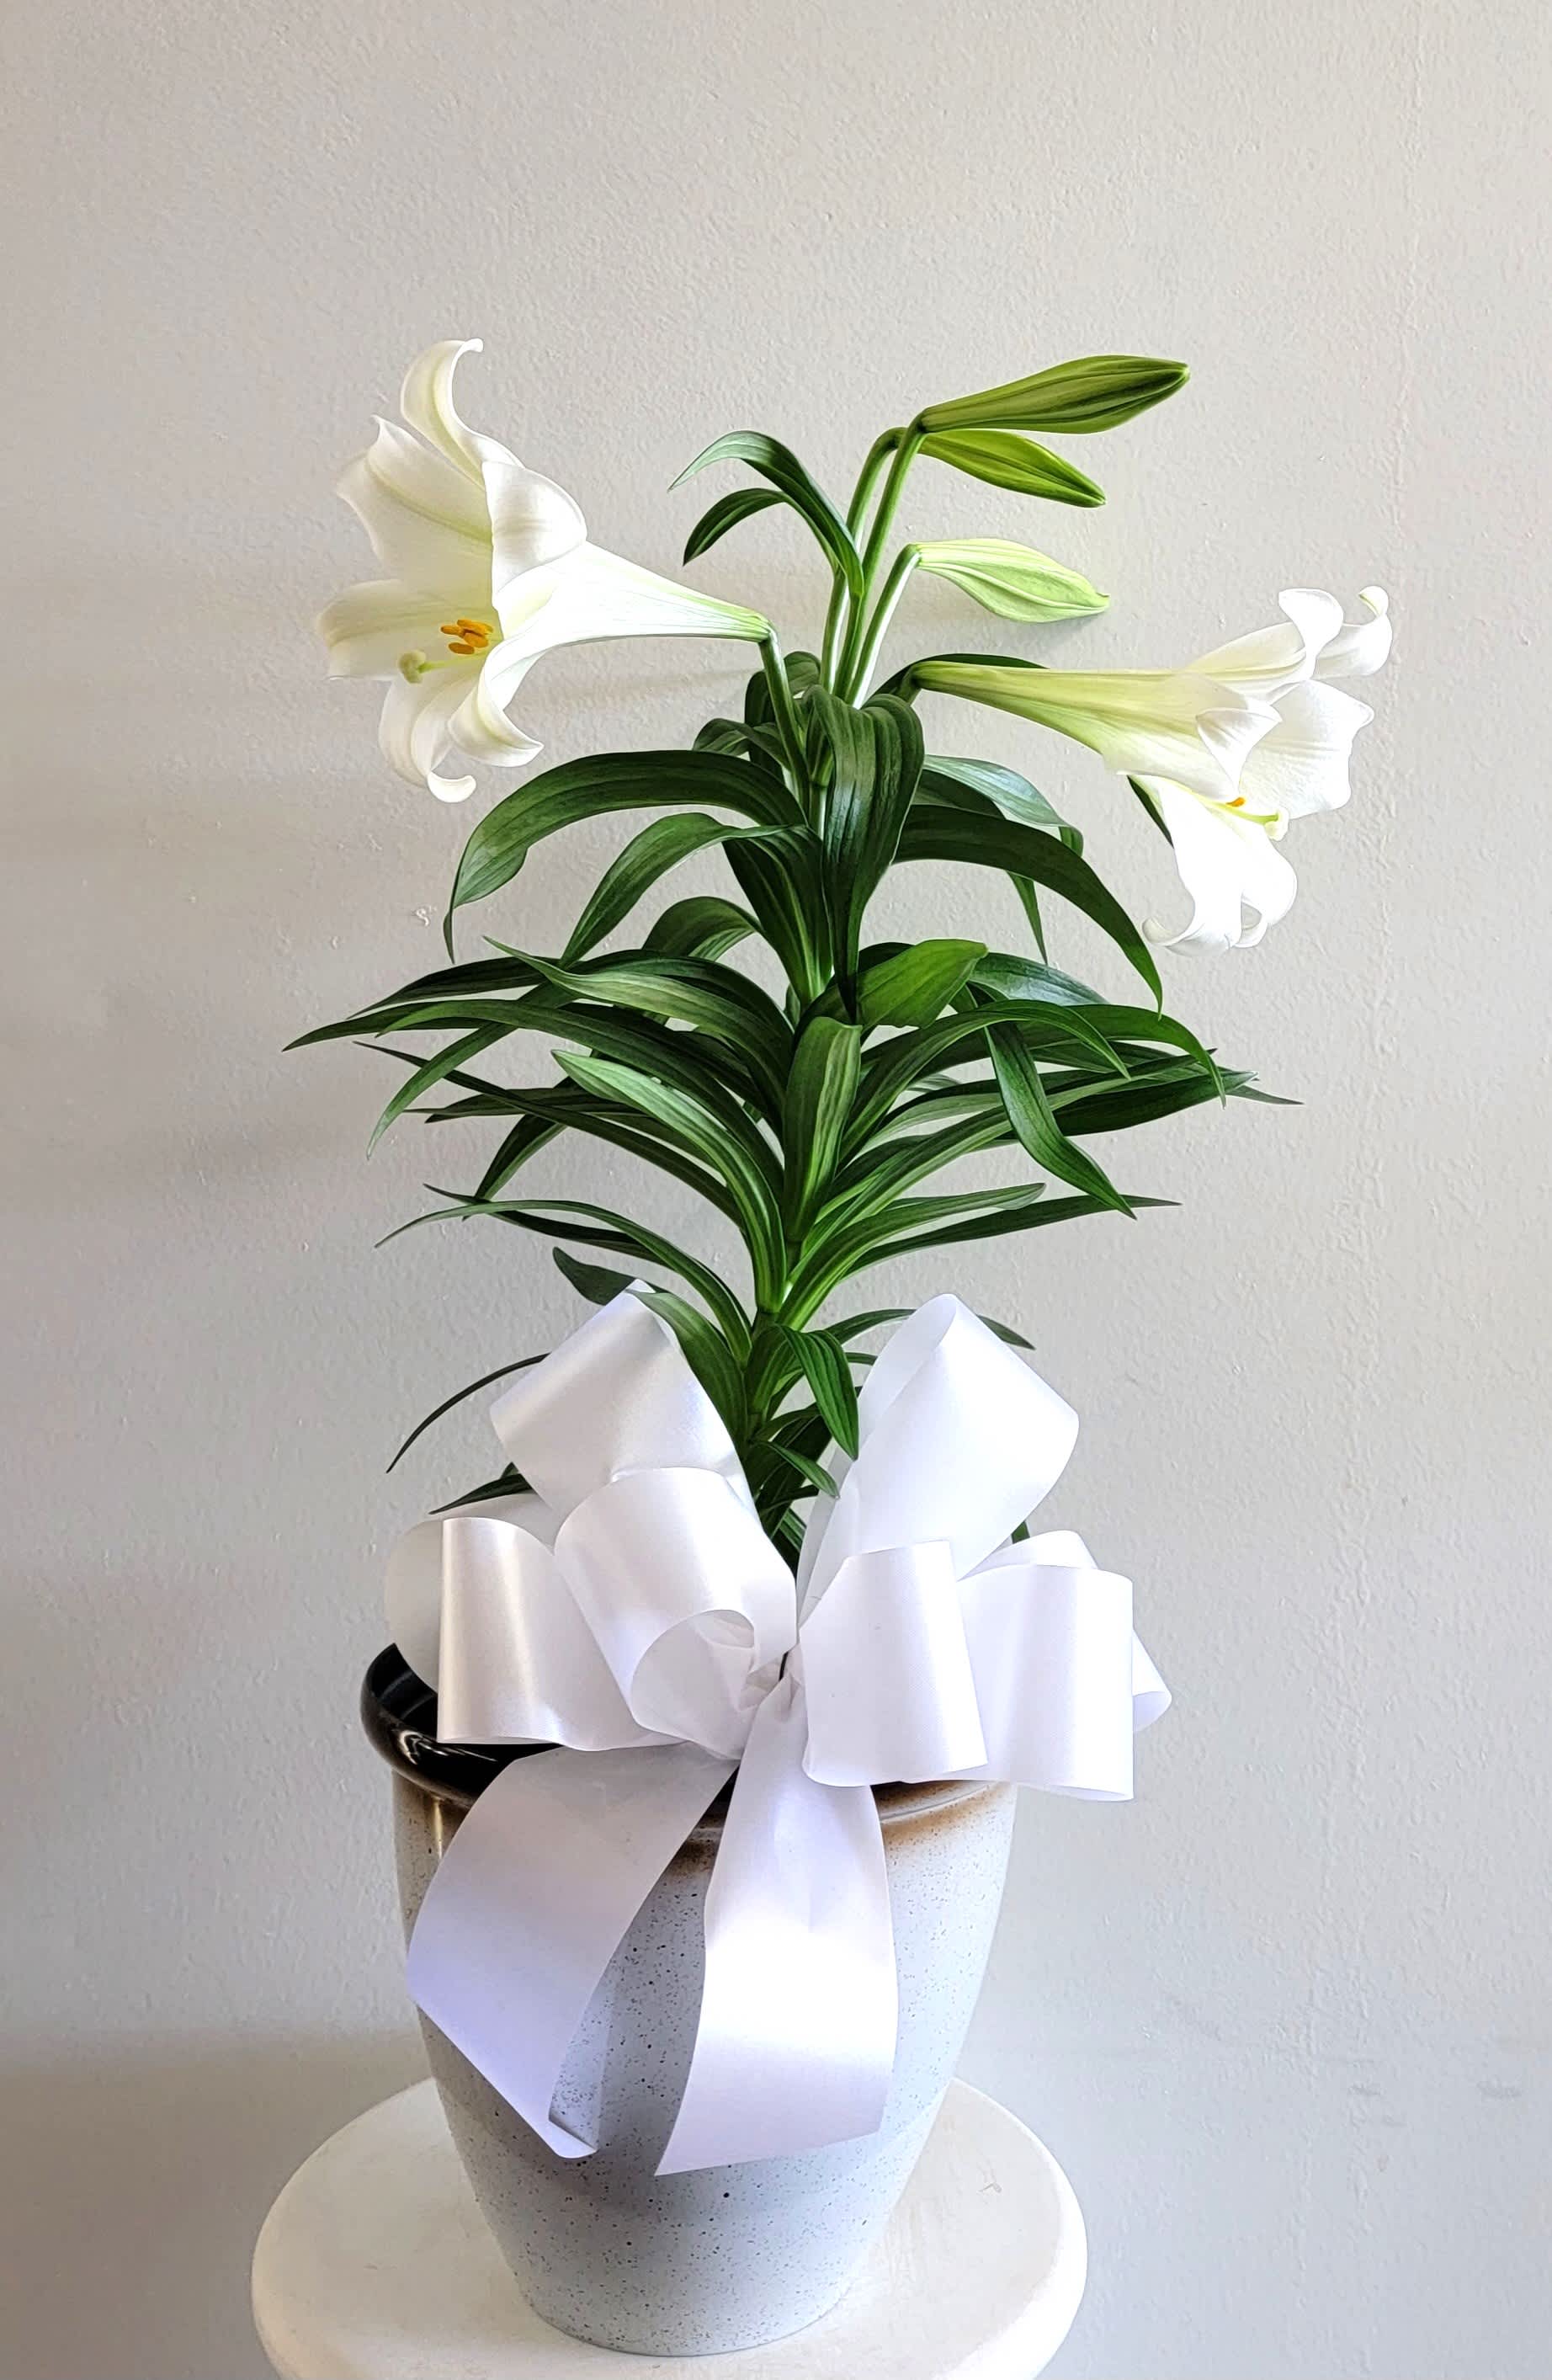 EASTER LILY - BEAUTIFUL PLANT IN A WHITE POT AND WHITE BOW, IT IS A NICE PRESENT FOR THIS SEASON